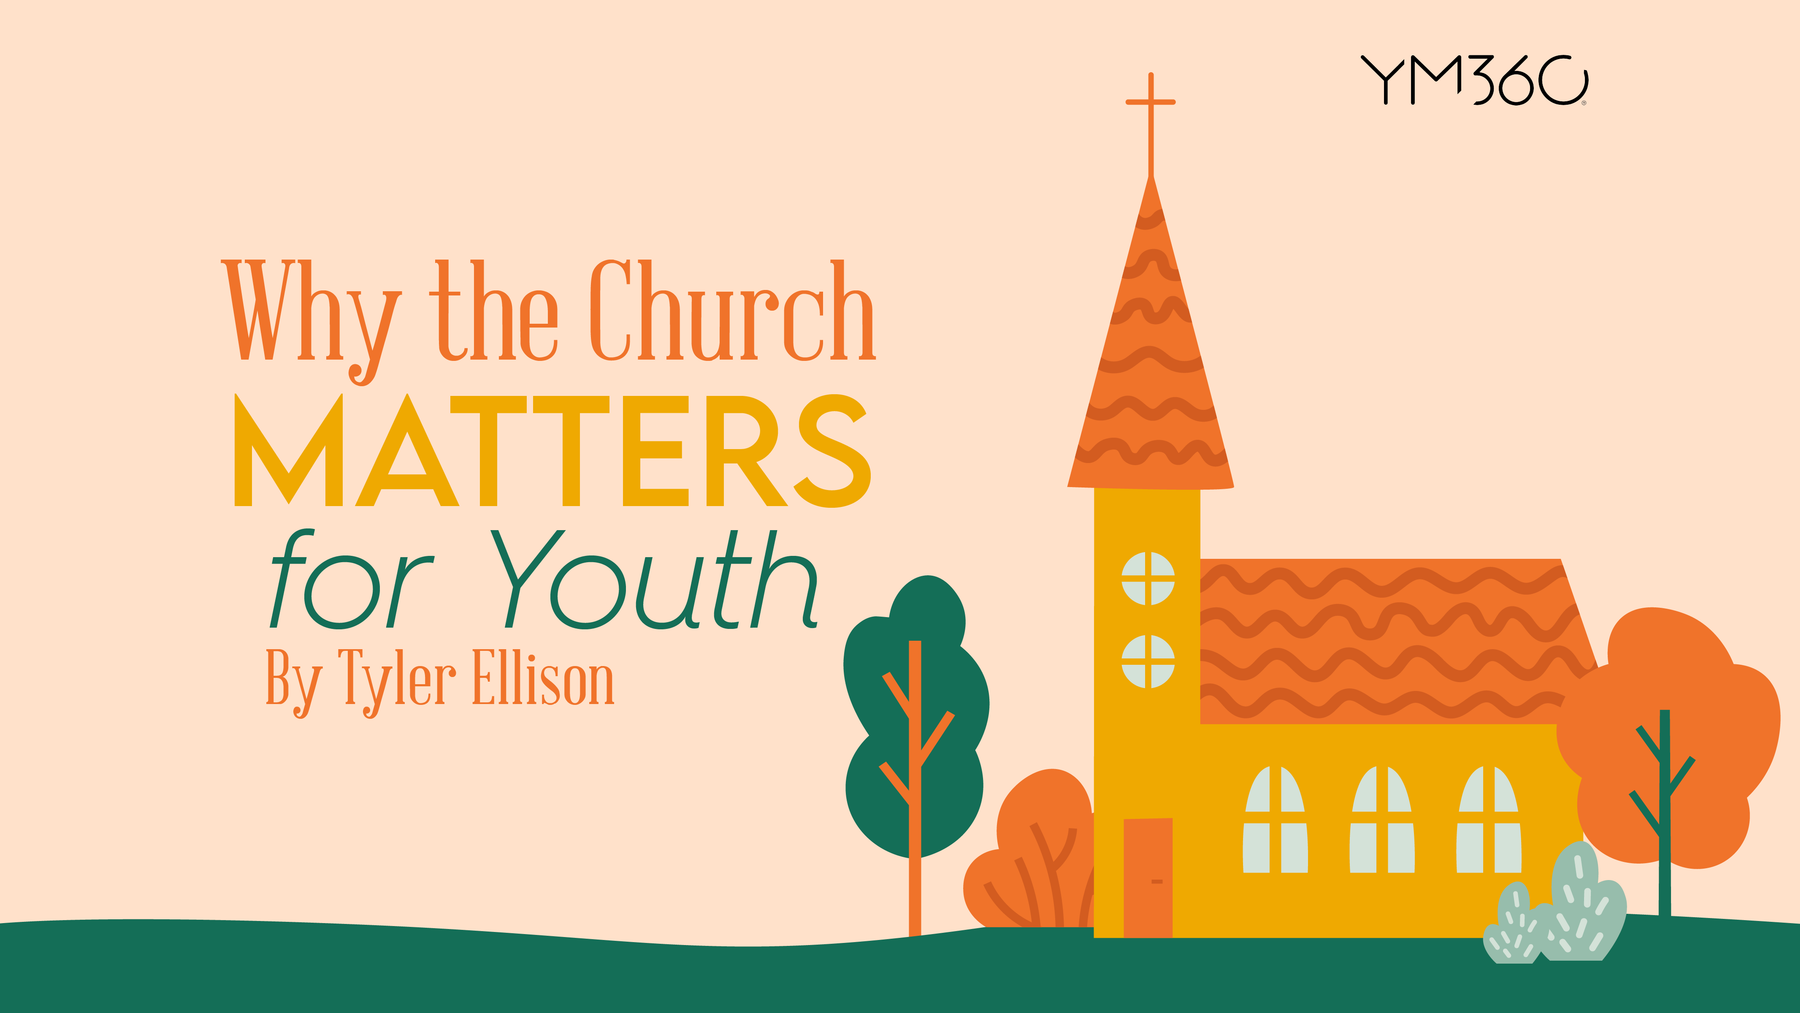 Why the Church Matters for Youth